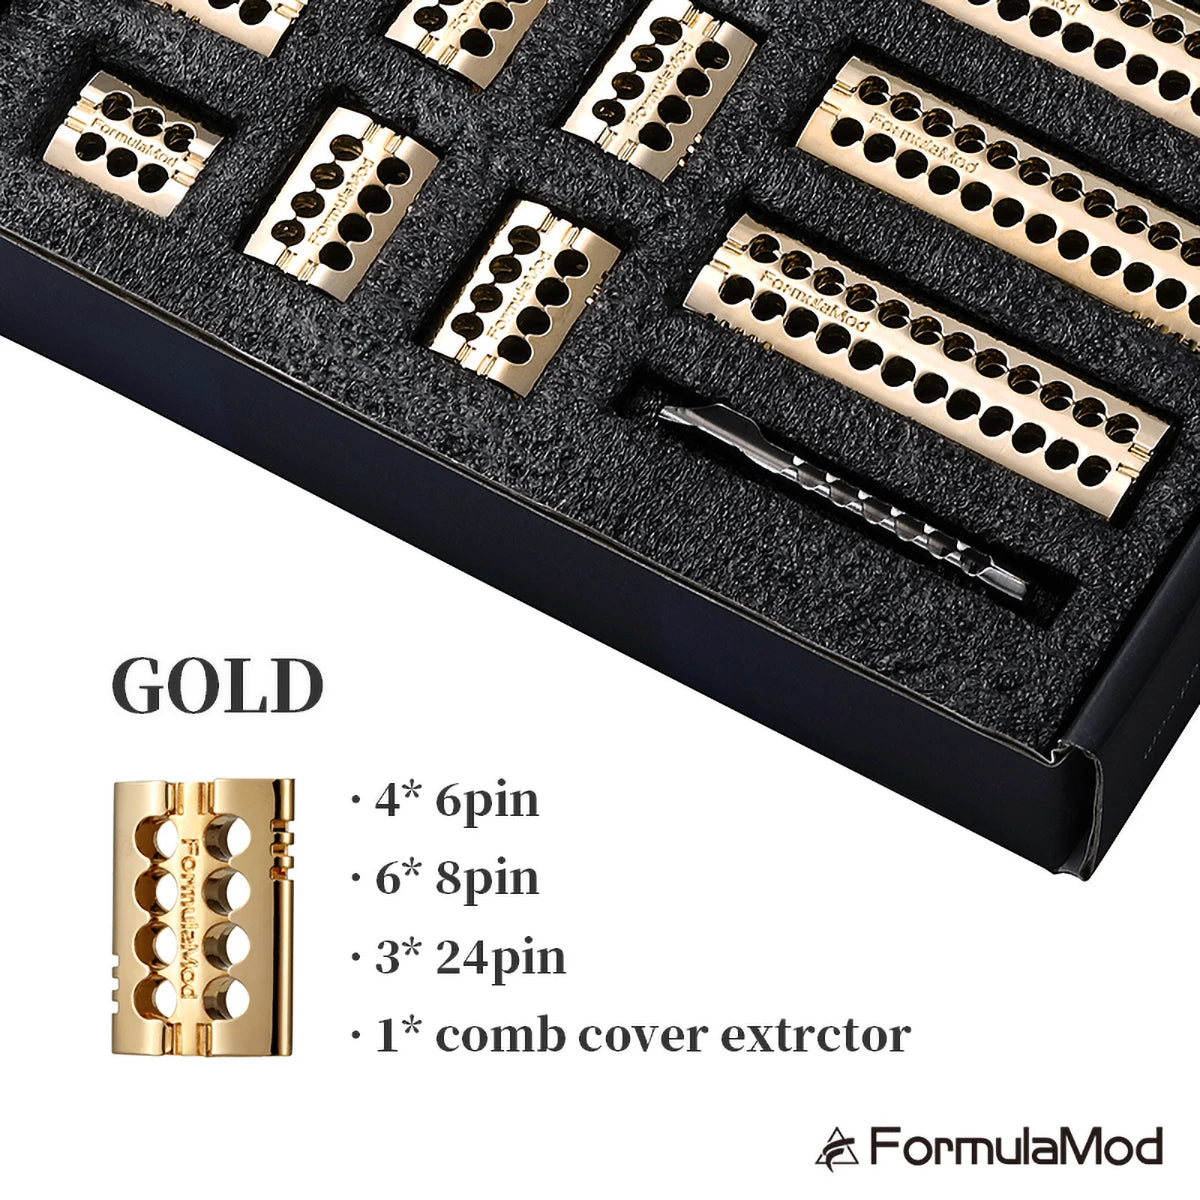 FormulaMod Cable Metal Comb, Copper Organizer Cable Management Tool For 16/18 AWG PSU Extension/Modular Cable Fm-JSXJTZ